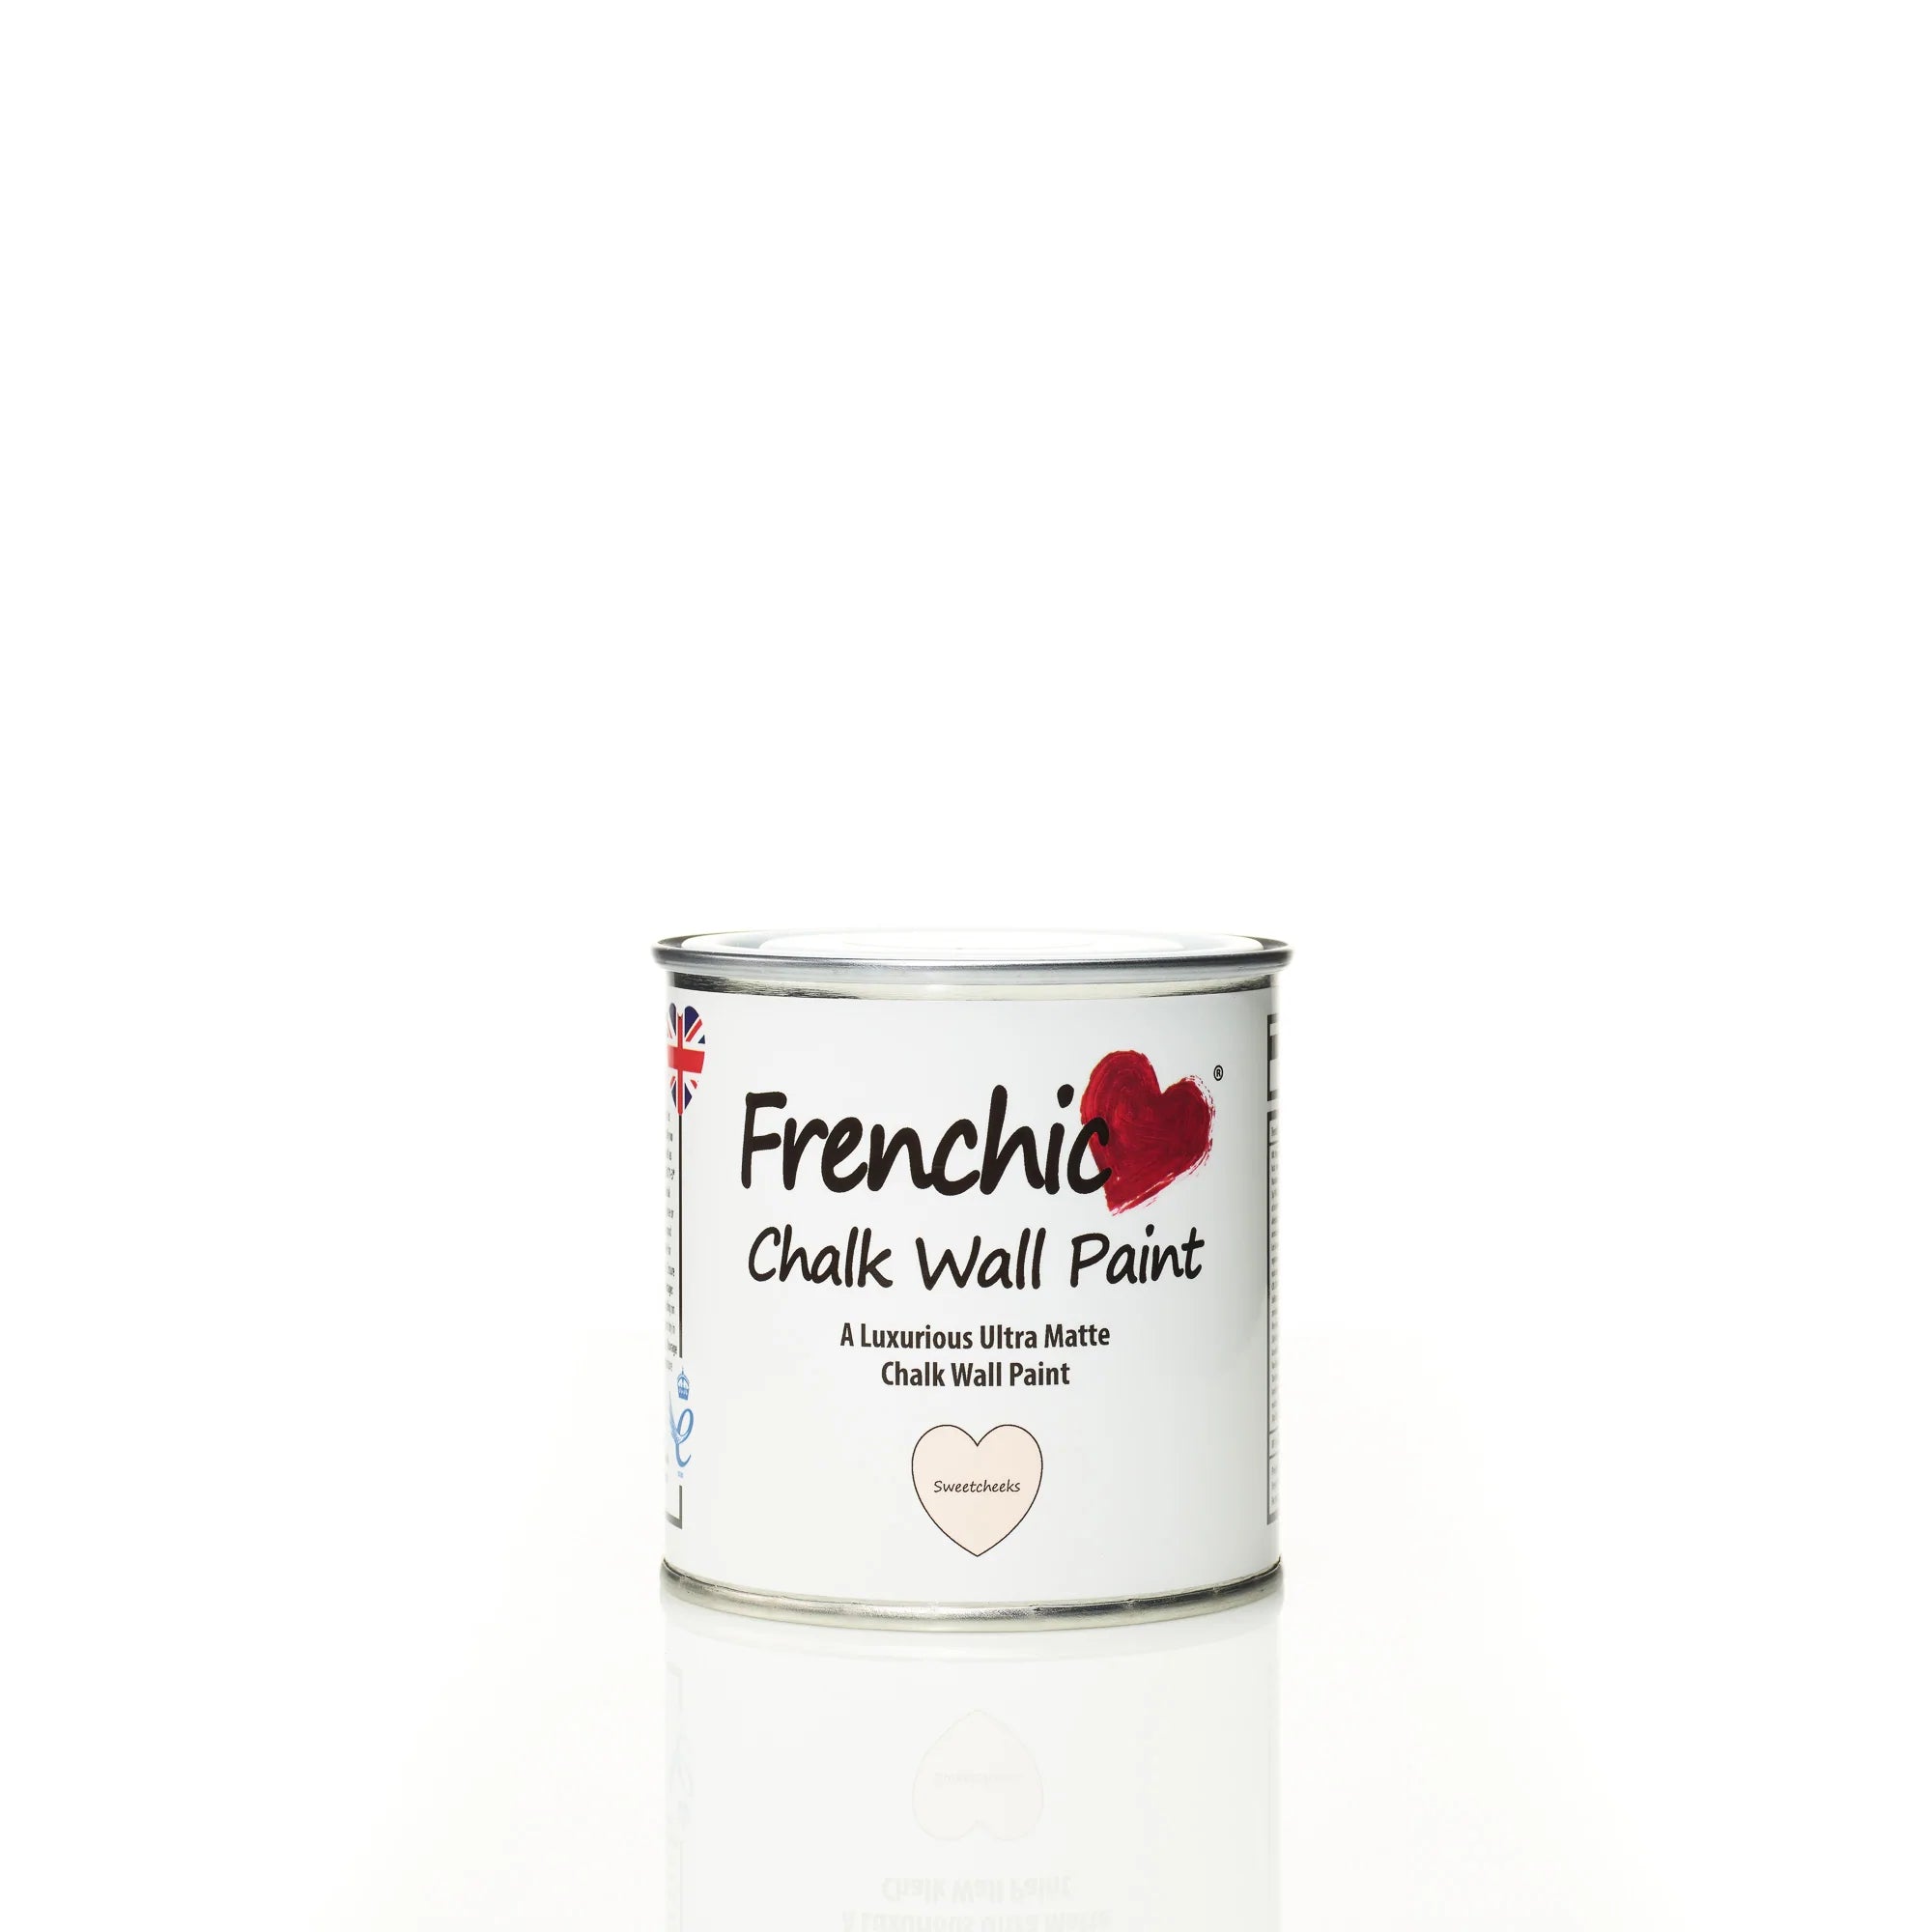 Frenchic Paint | Sweetcheeks Wall Paint by Weirs of Baggot St